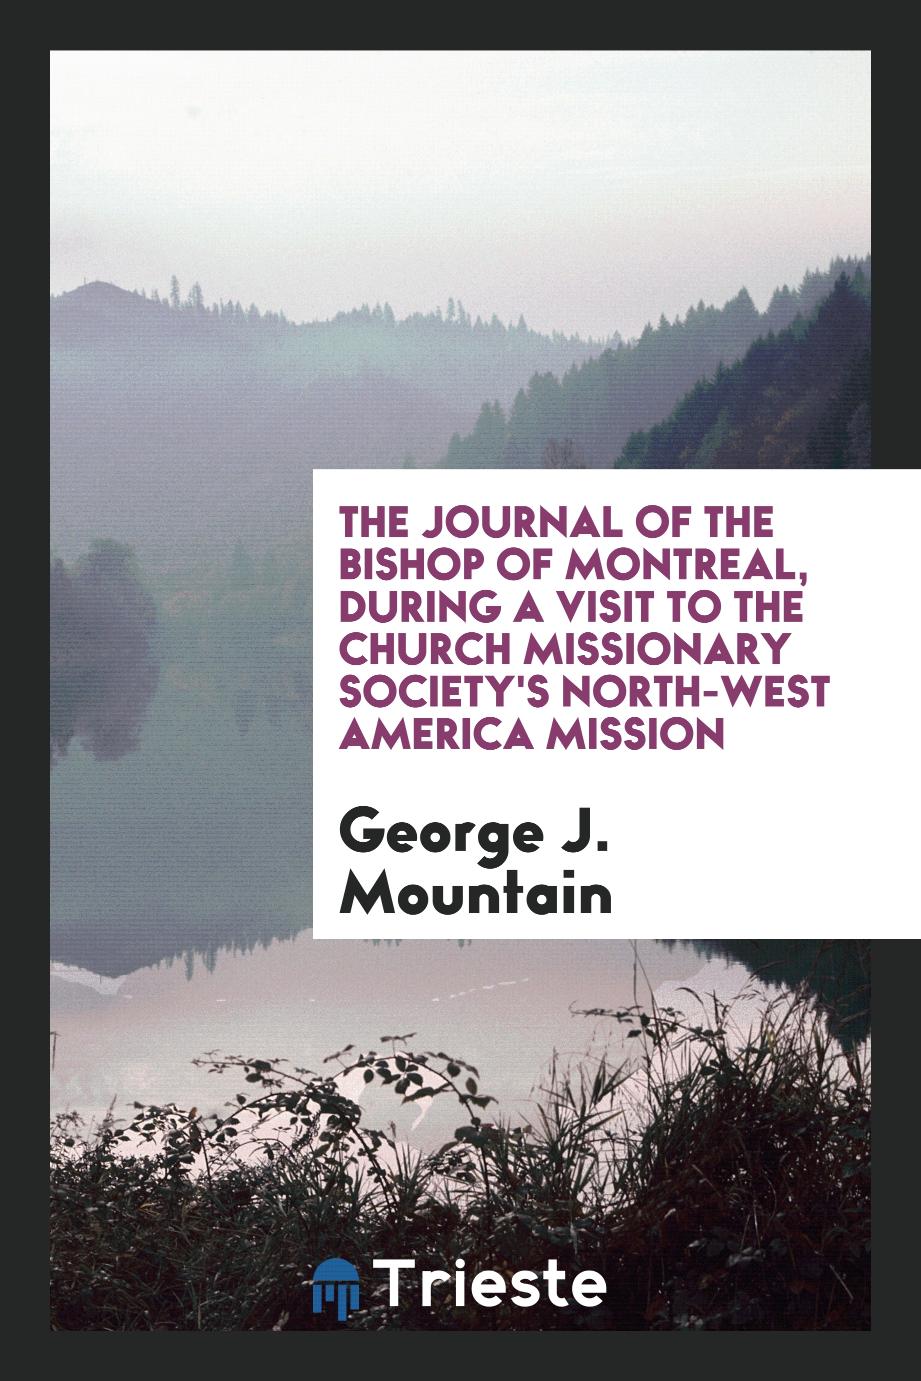 The journal of the Bishop of Montreal, during a visit to the Church Missionary Society's North-West America mission